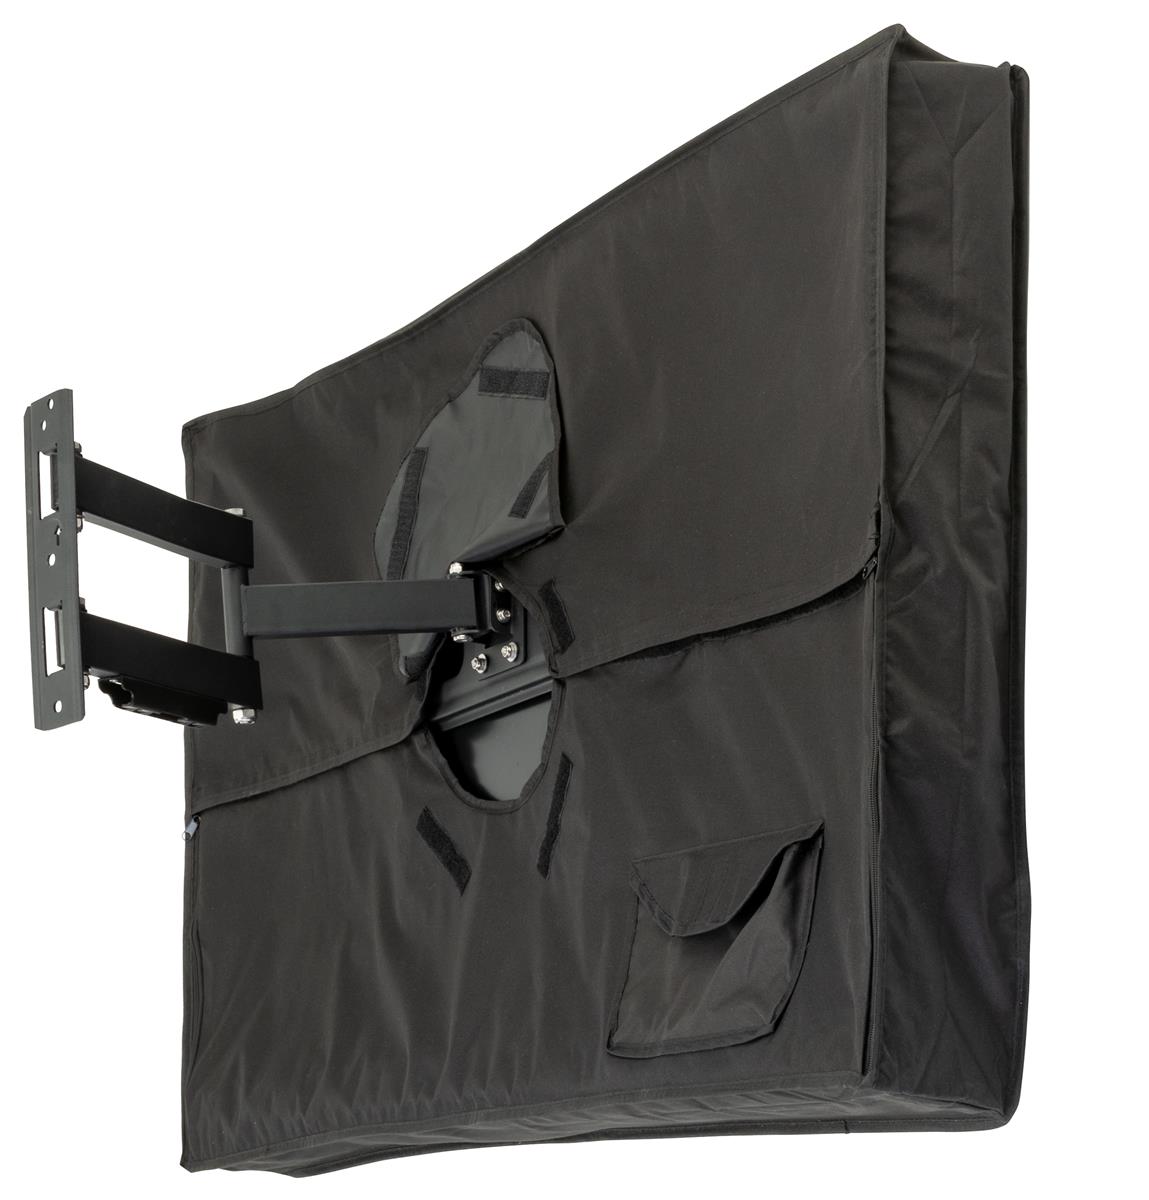 Outdoor Tv Cover Supports 40 42, How To Cover Outdoor Tv